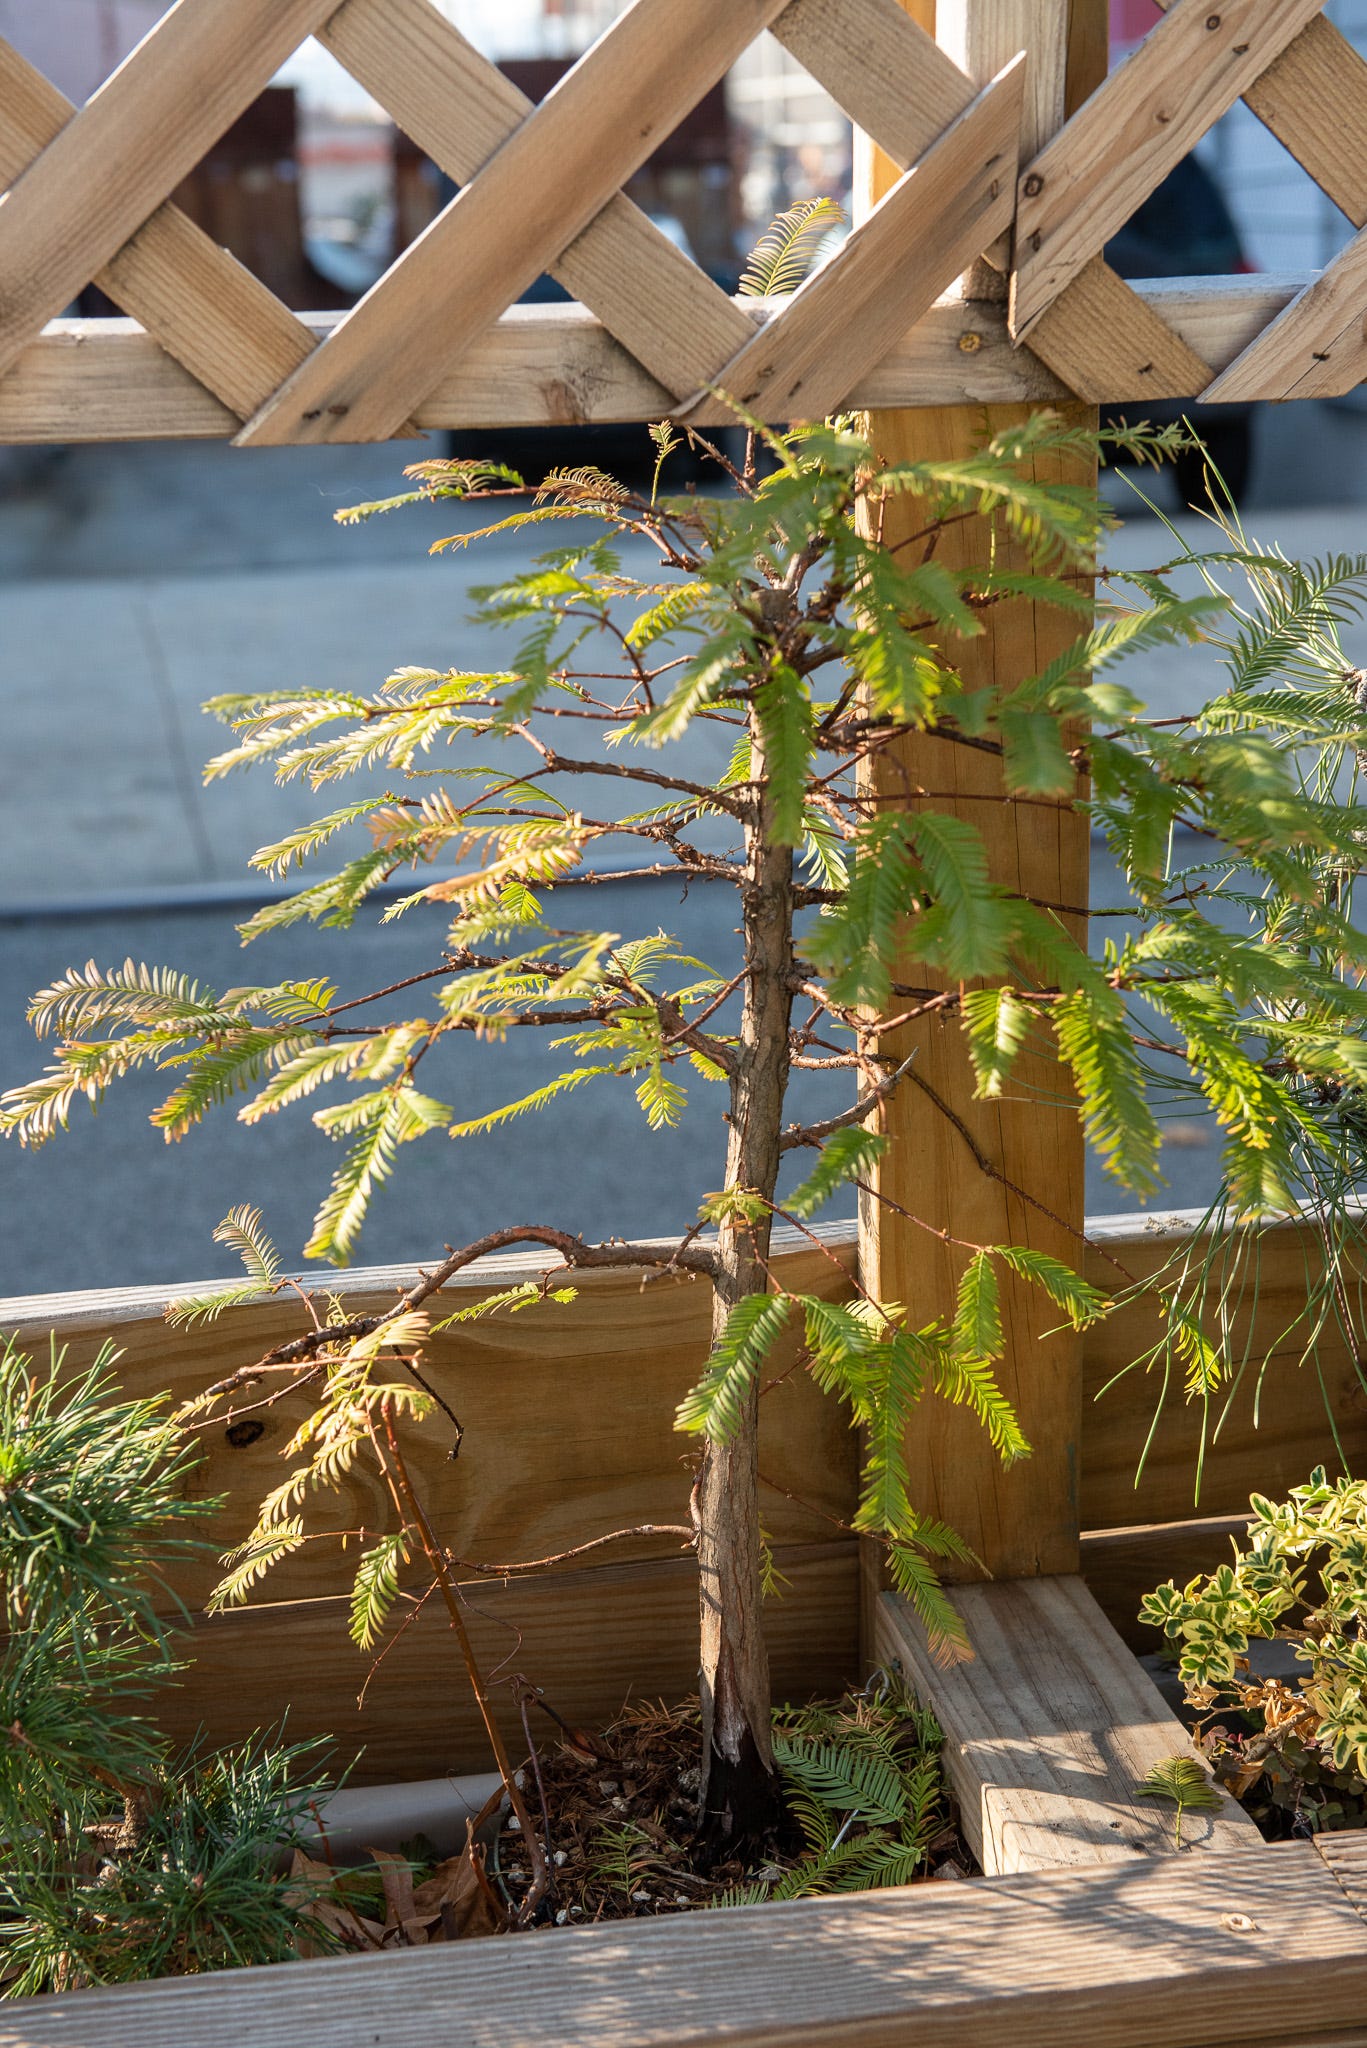 ID: Photo of dawn redwood with brown autumn leaves and many buds